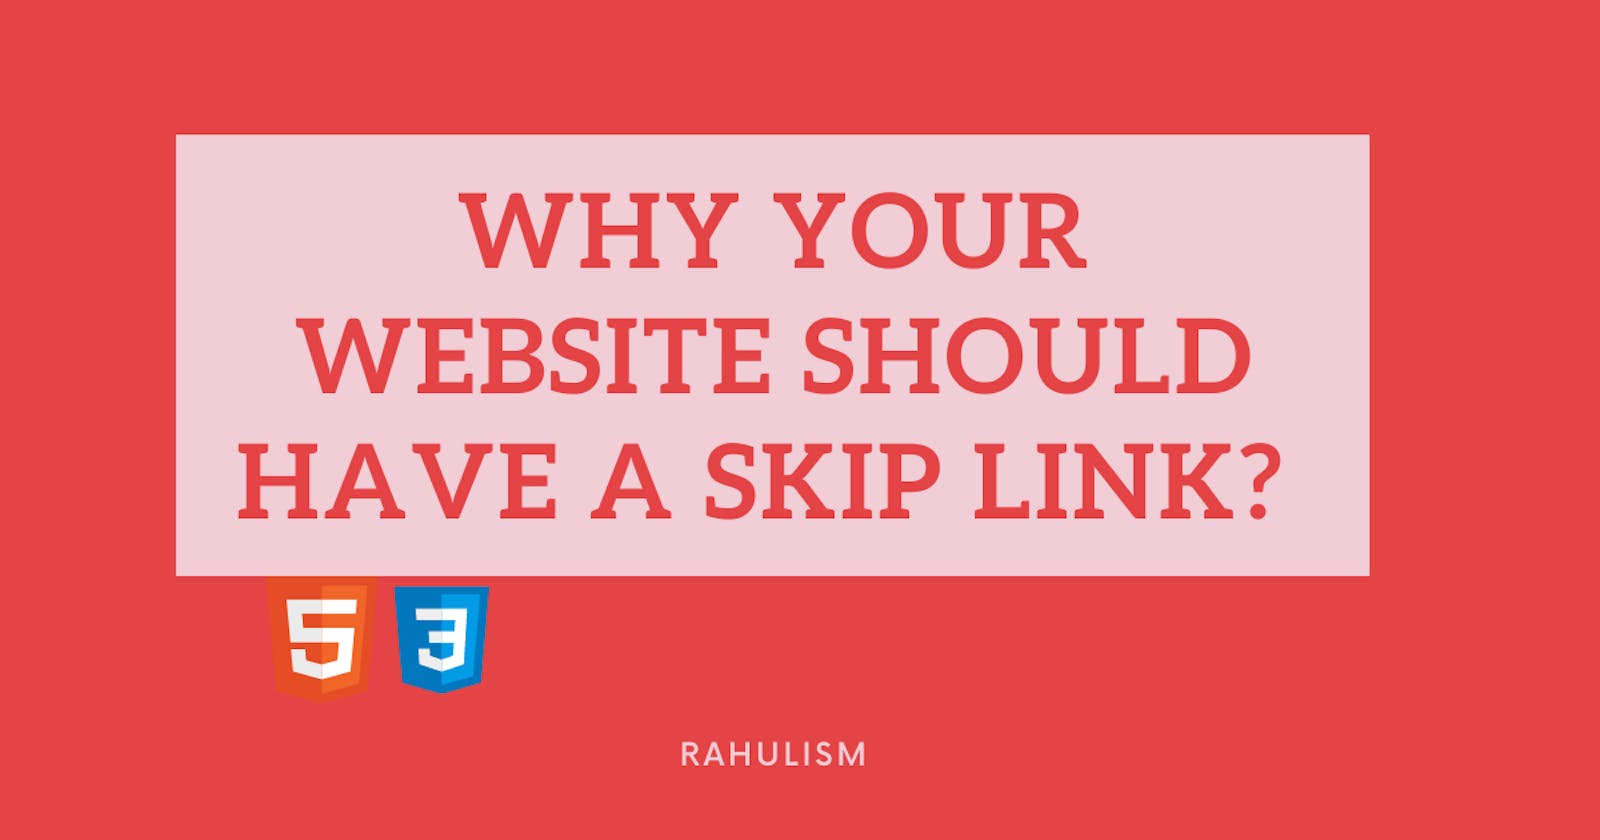 Why your website should have a Skip Link?